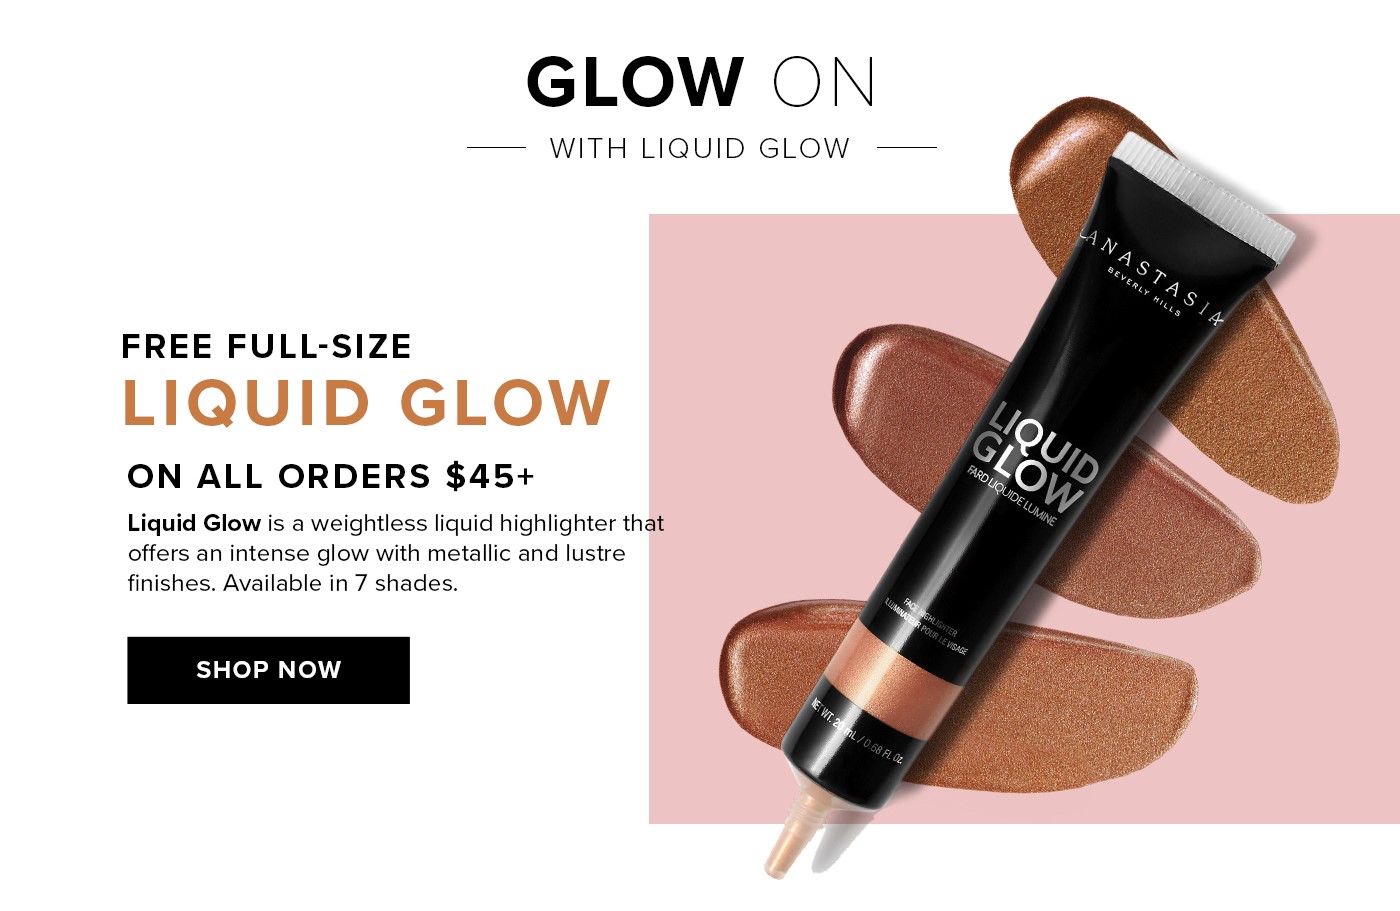 FREE FULL-SIZE LIQUID GLOW ON ORDERS $45+ Liquid Glow is a weightless liquid highlighter that offers an intense glow with metallic and lustre finishes. Available in 7 shades. SHOP NOW